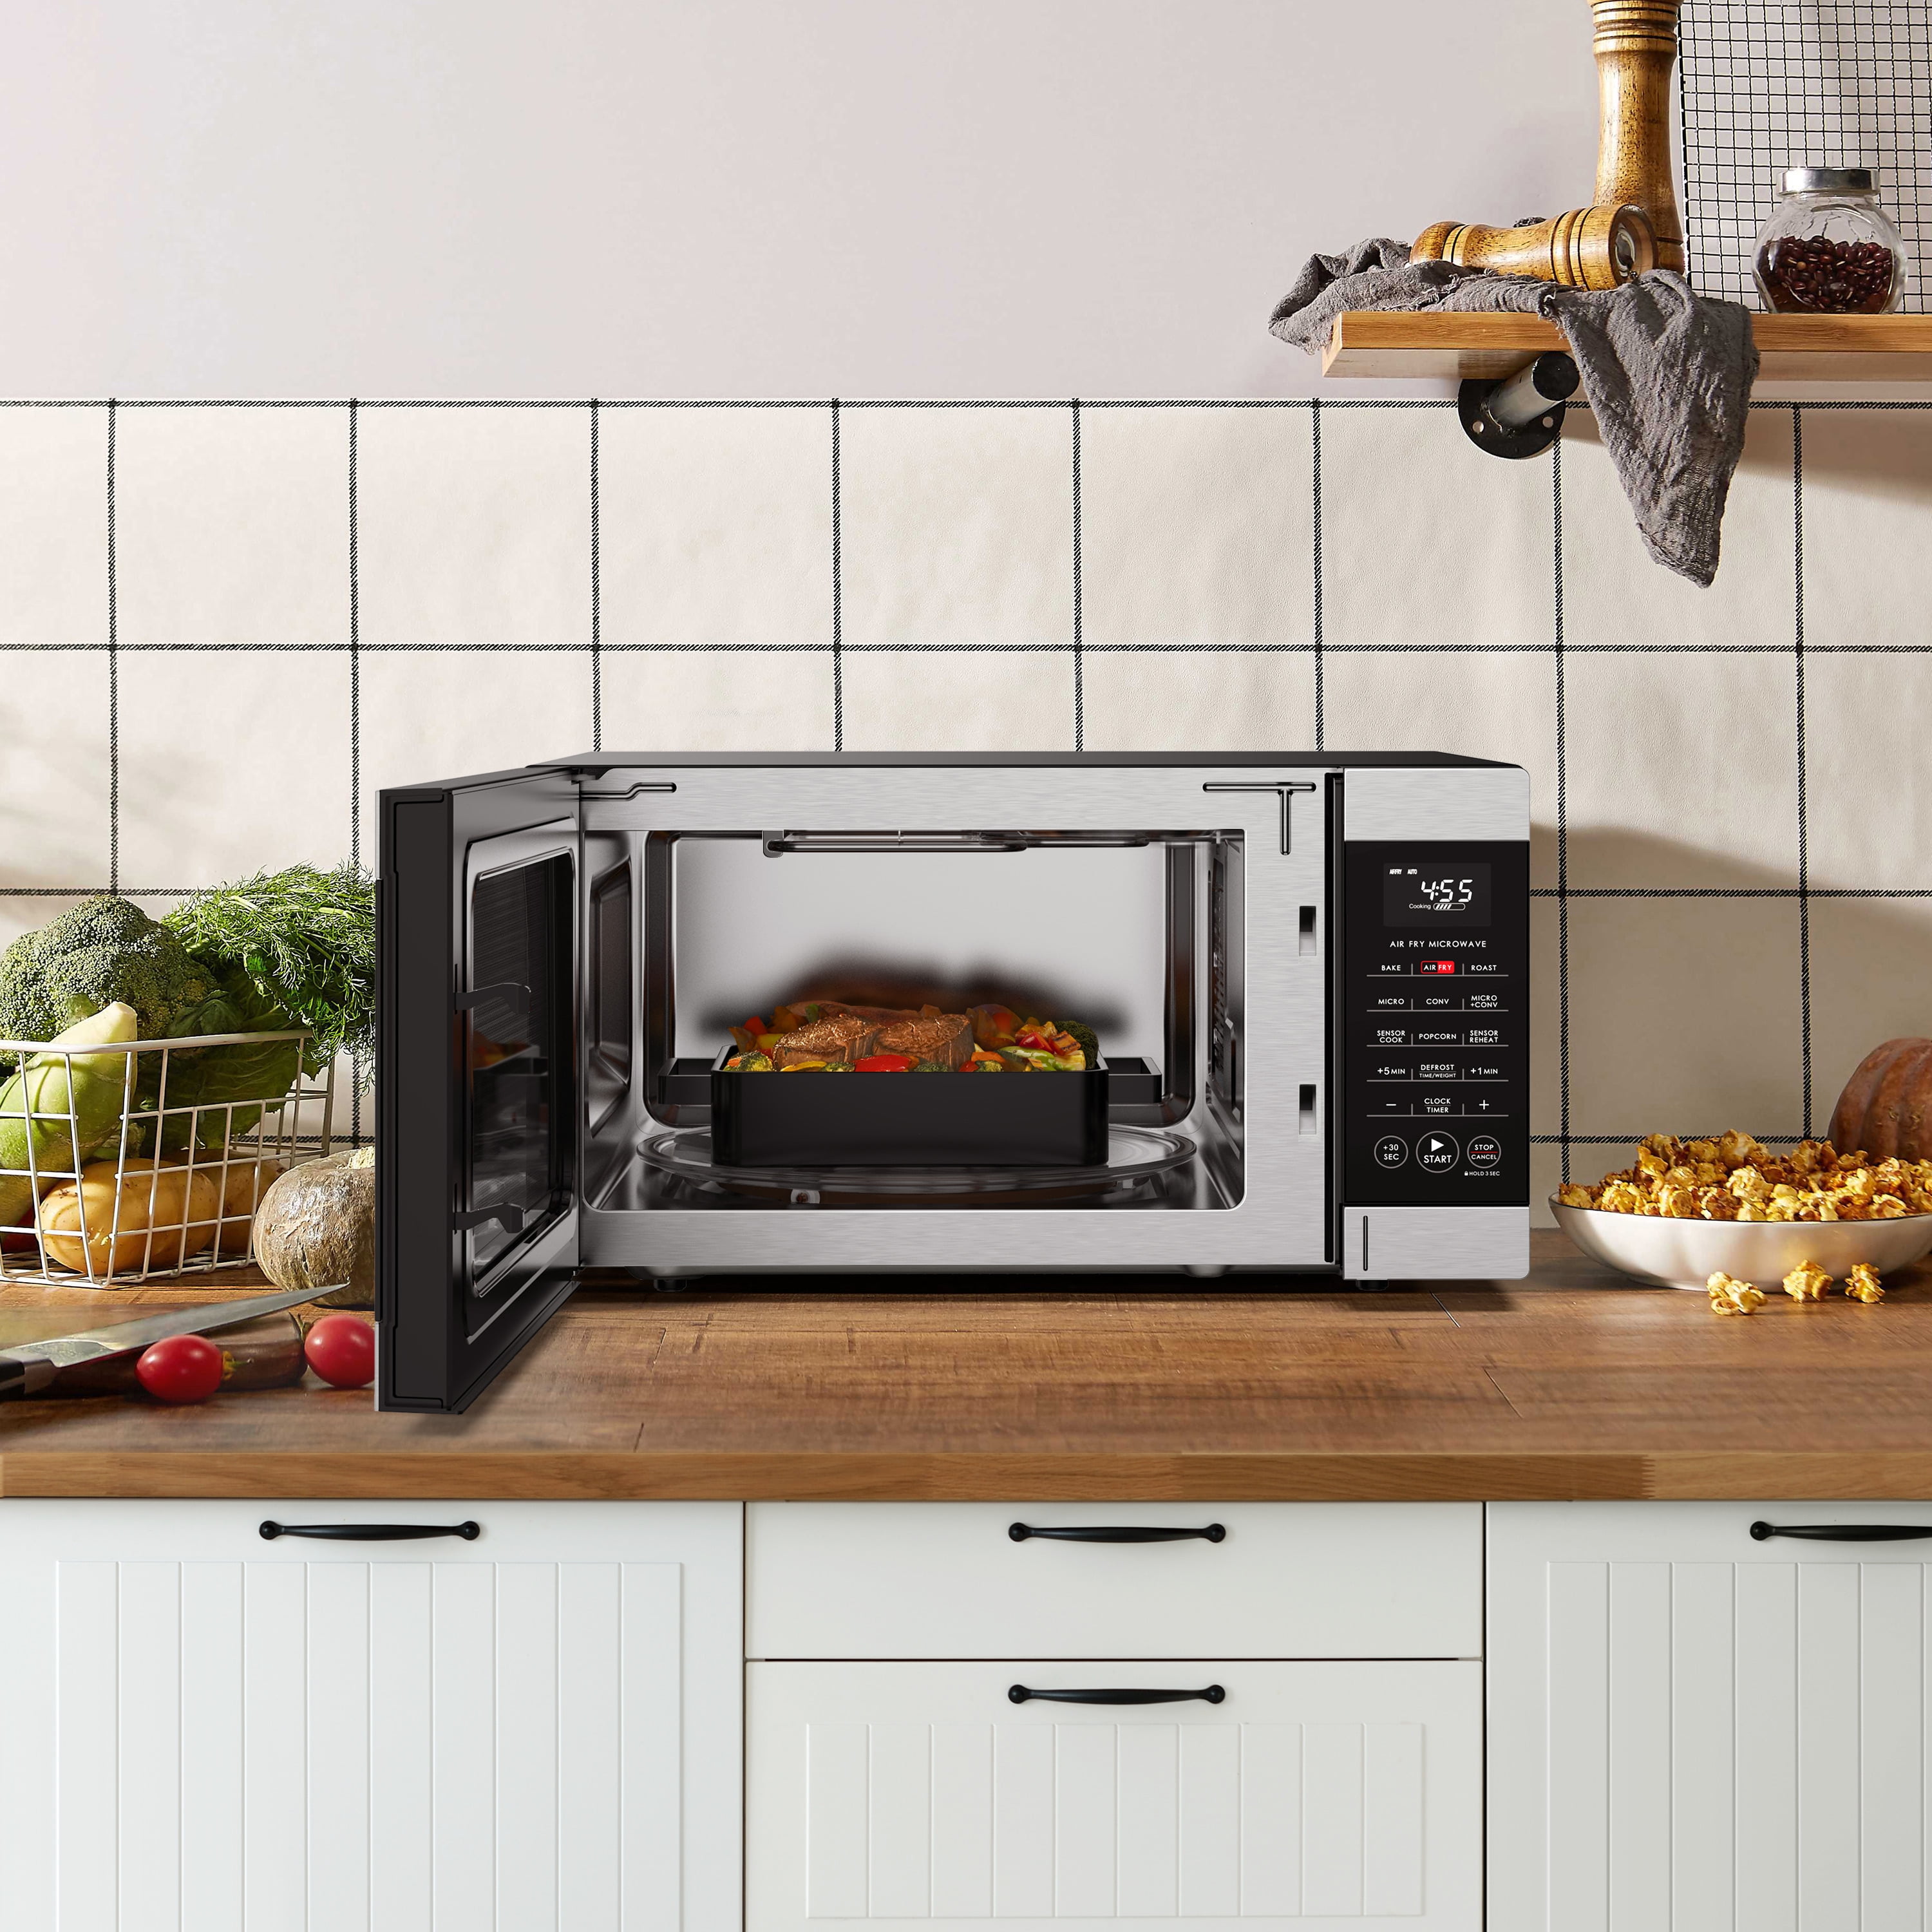 GSWWA12S1SA10 by Galanz - Galanz 1.2 Cu Ft SpeedWave™, 3-in-1 Air Fryer,  Convection Oven and Microwave with Combi Speed Cooking Feature, Sensor  Cook, Inverter, TotalFry 360™ Technology True Convection in Stainless Steel